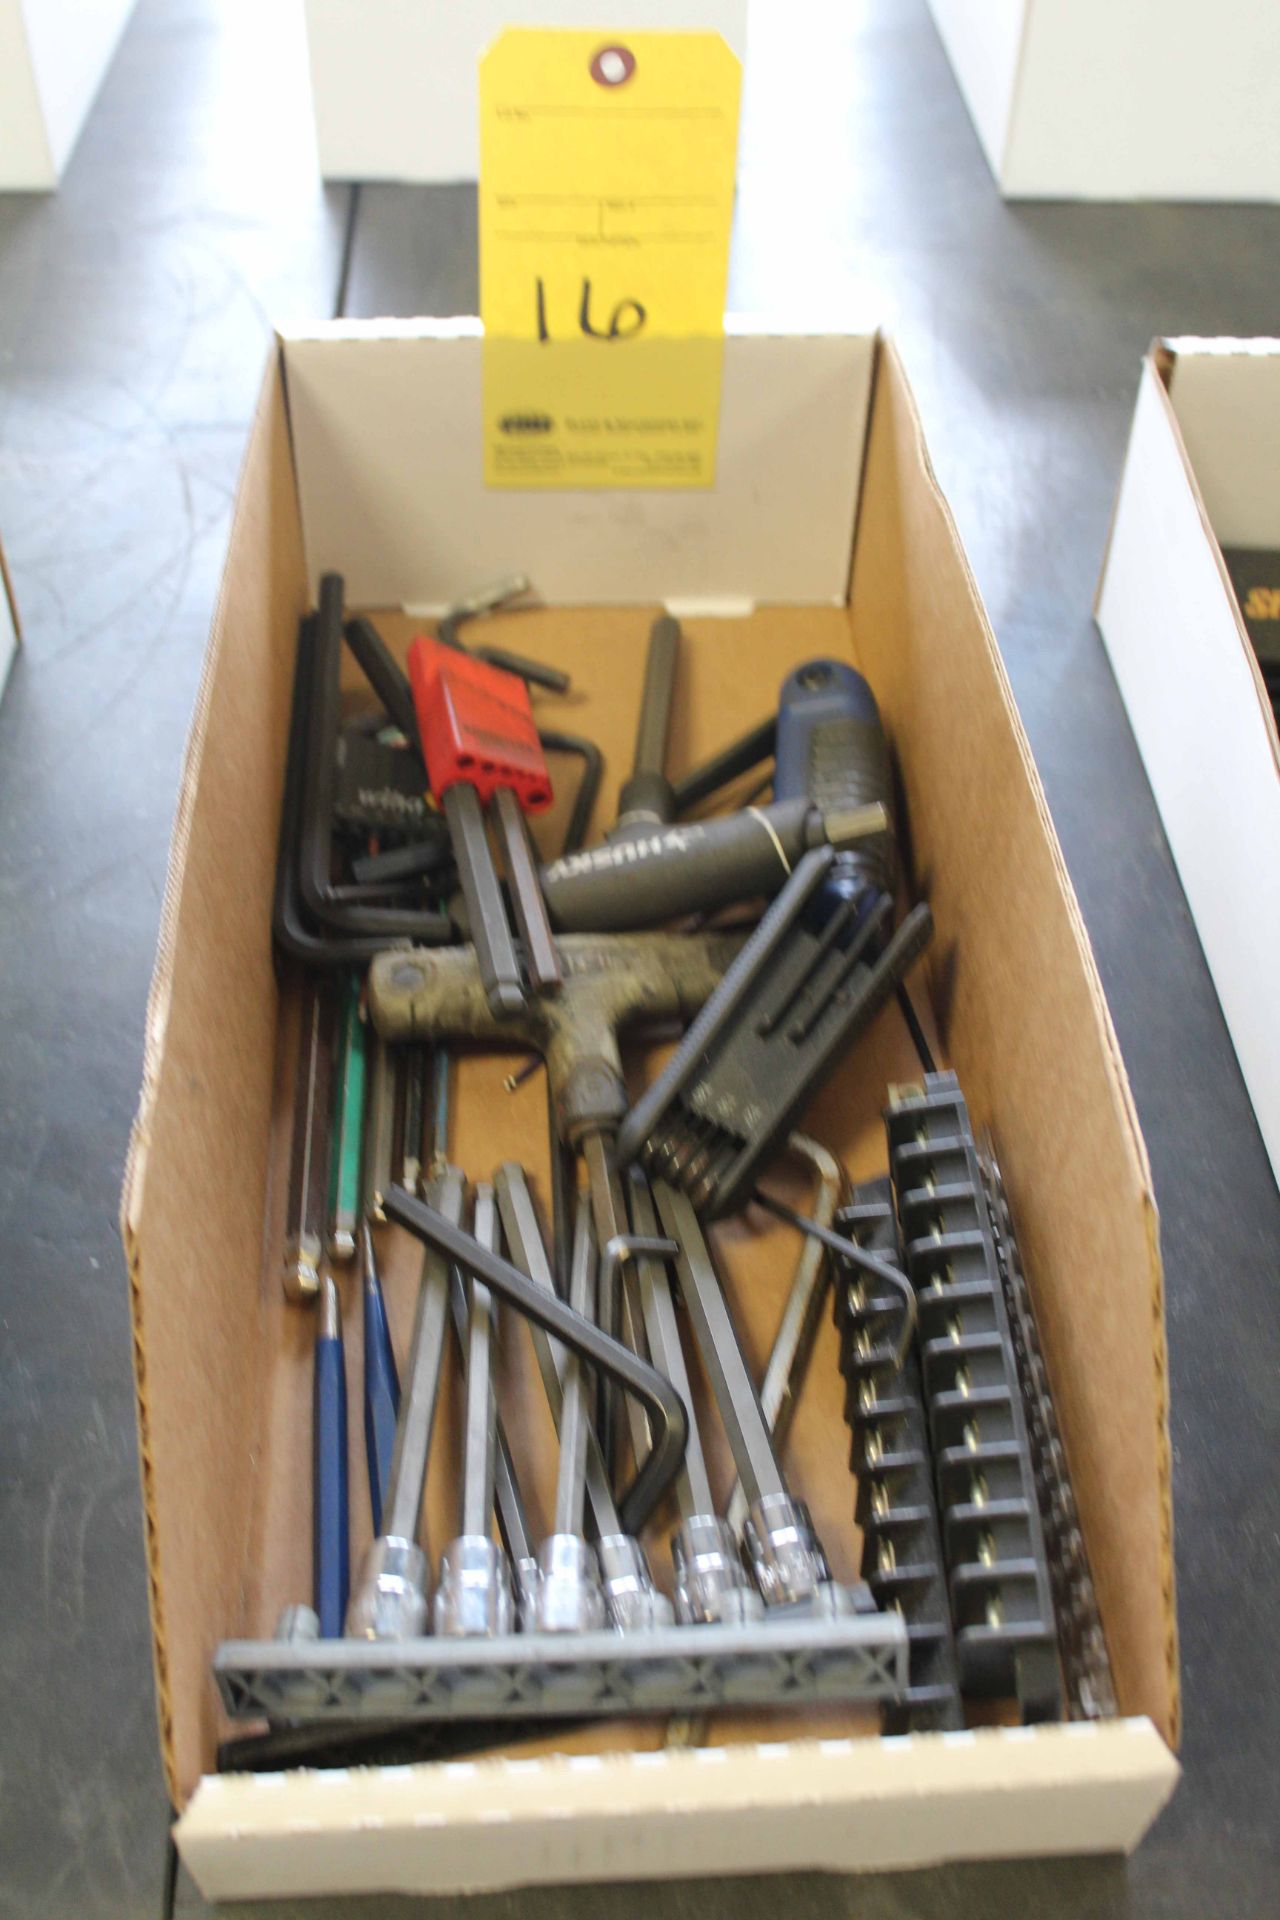 LOT OF SOCKET TYPE ALLEN WRENCHES (in one box)